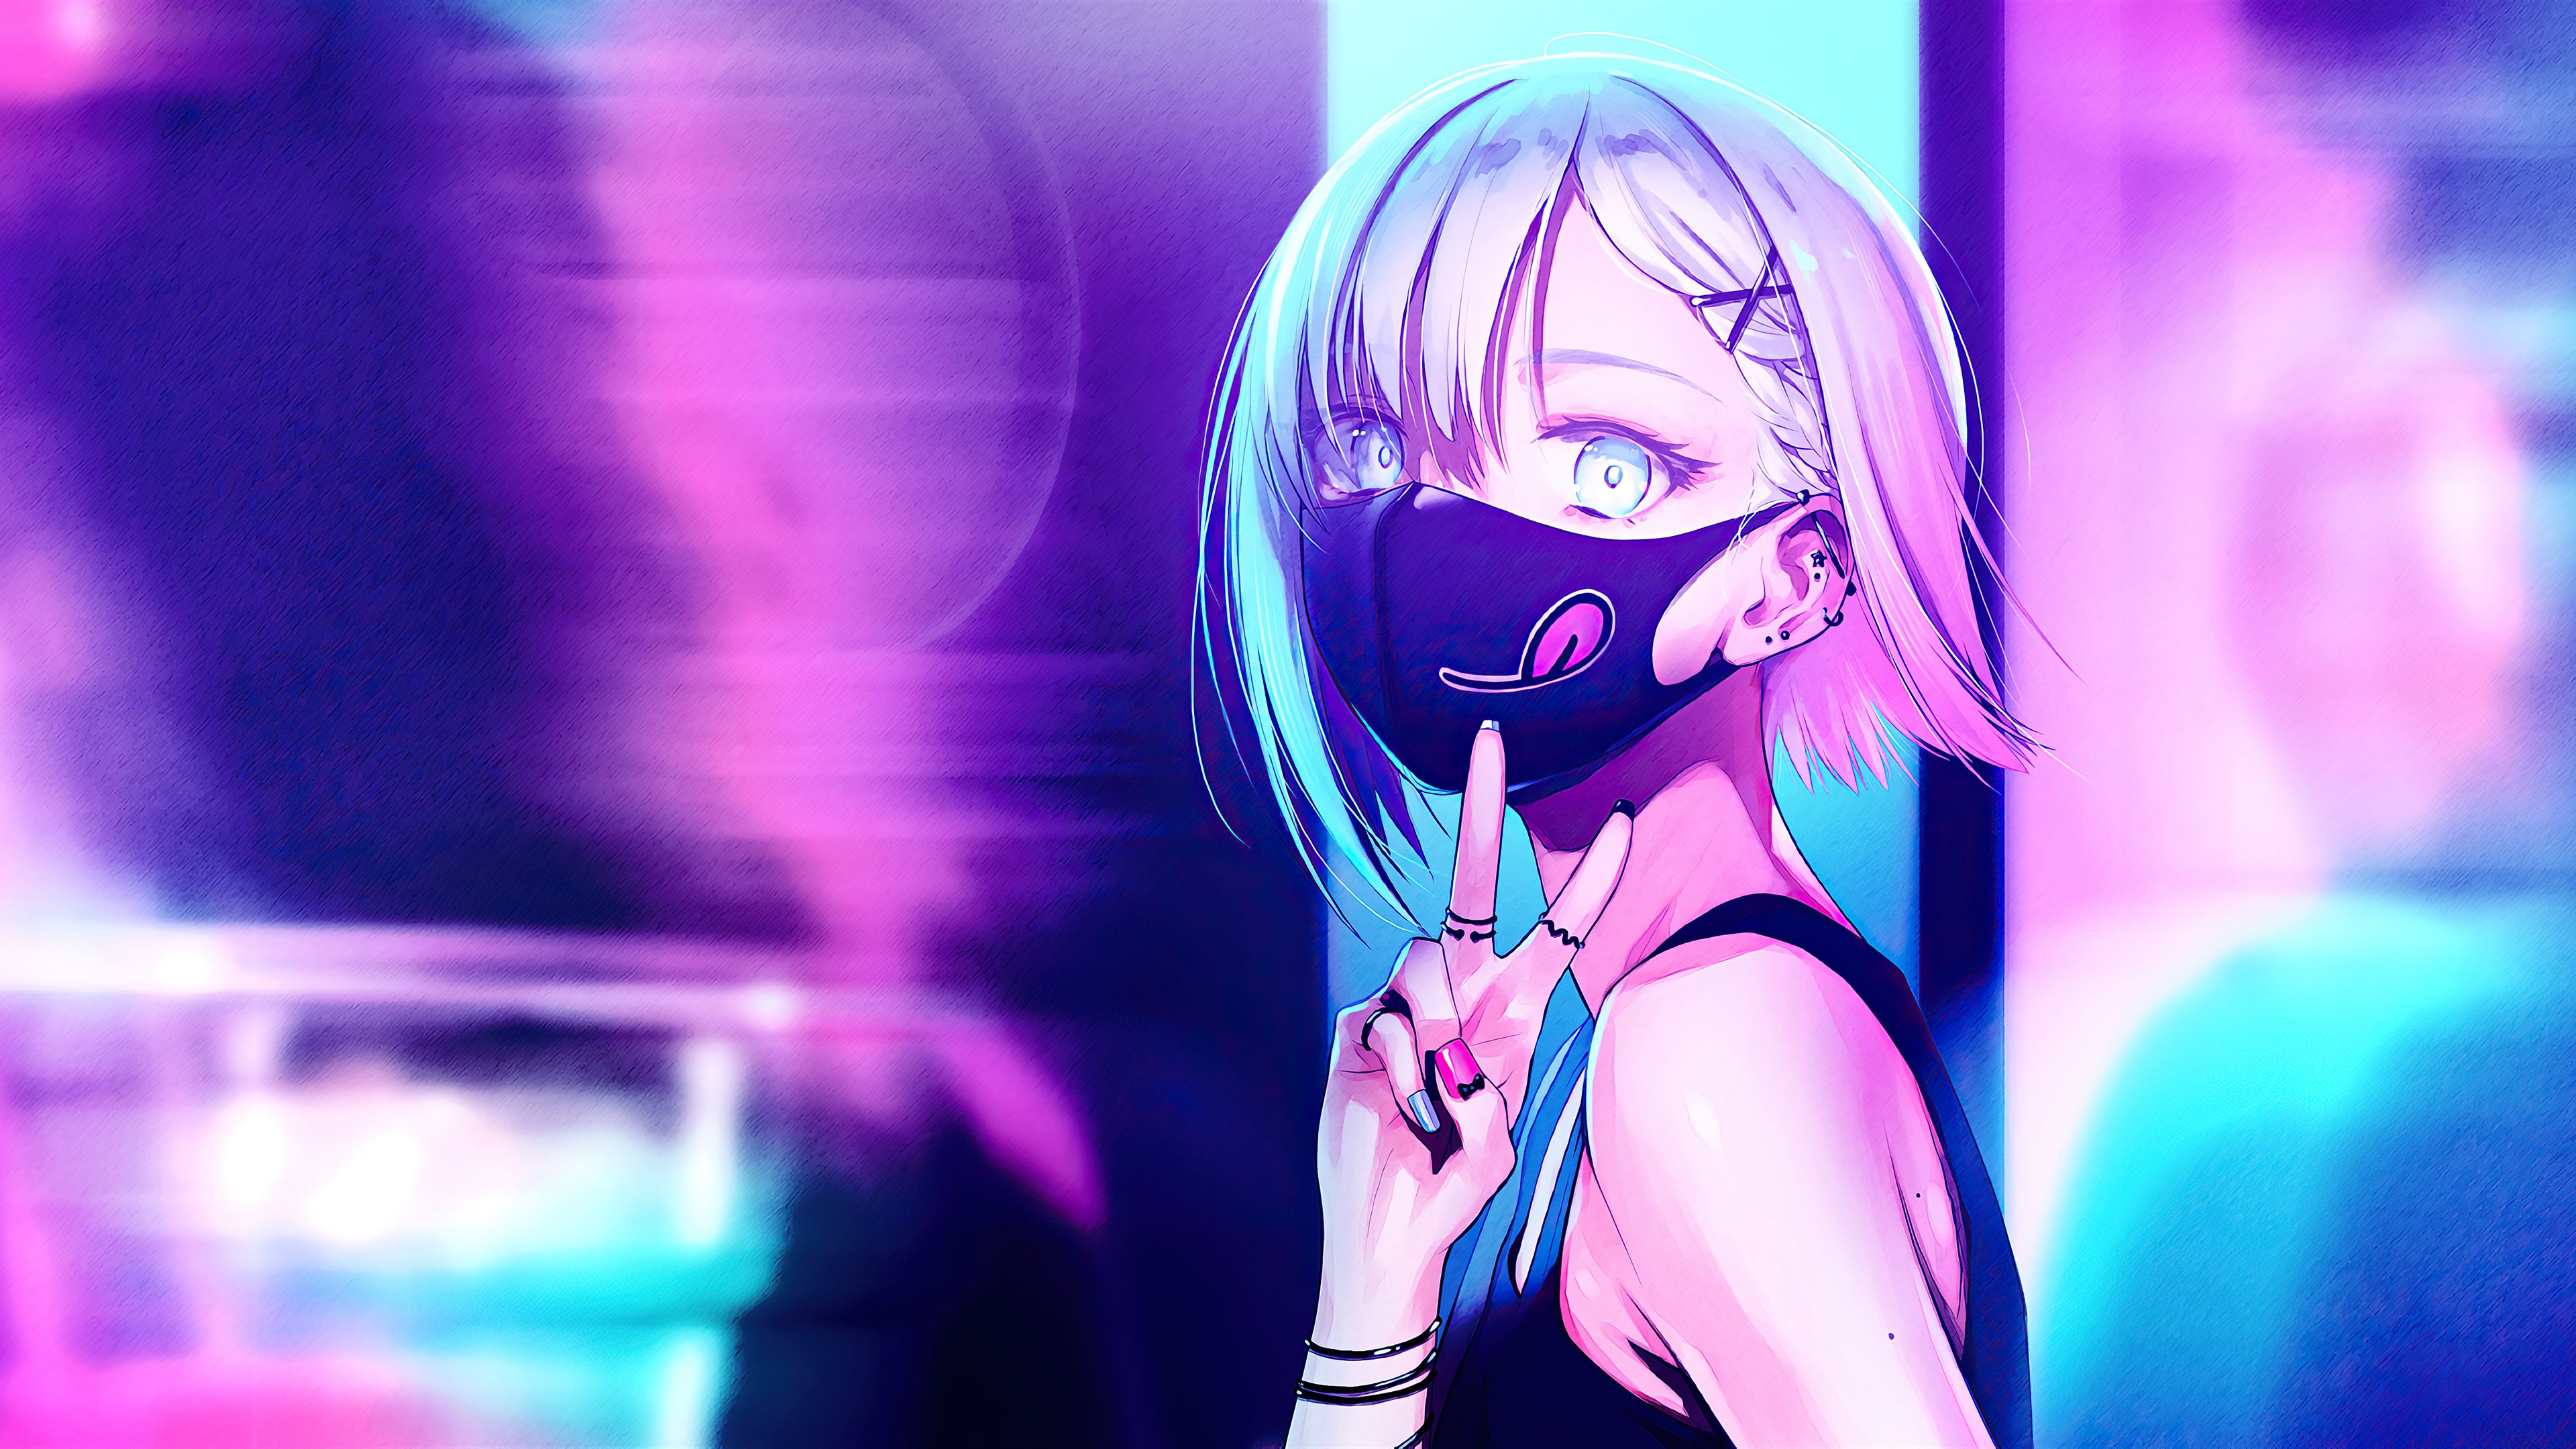 Anime Girl City Lights Neon Face Mask ...hdqwalls.